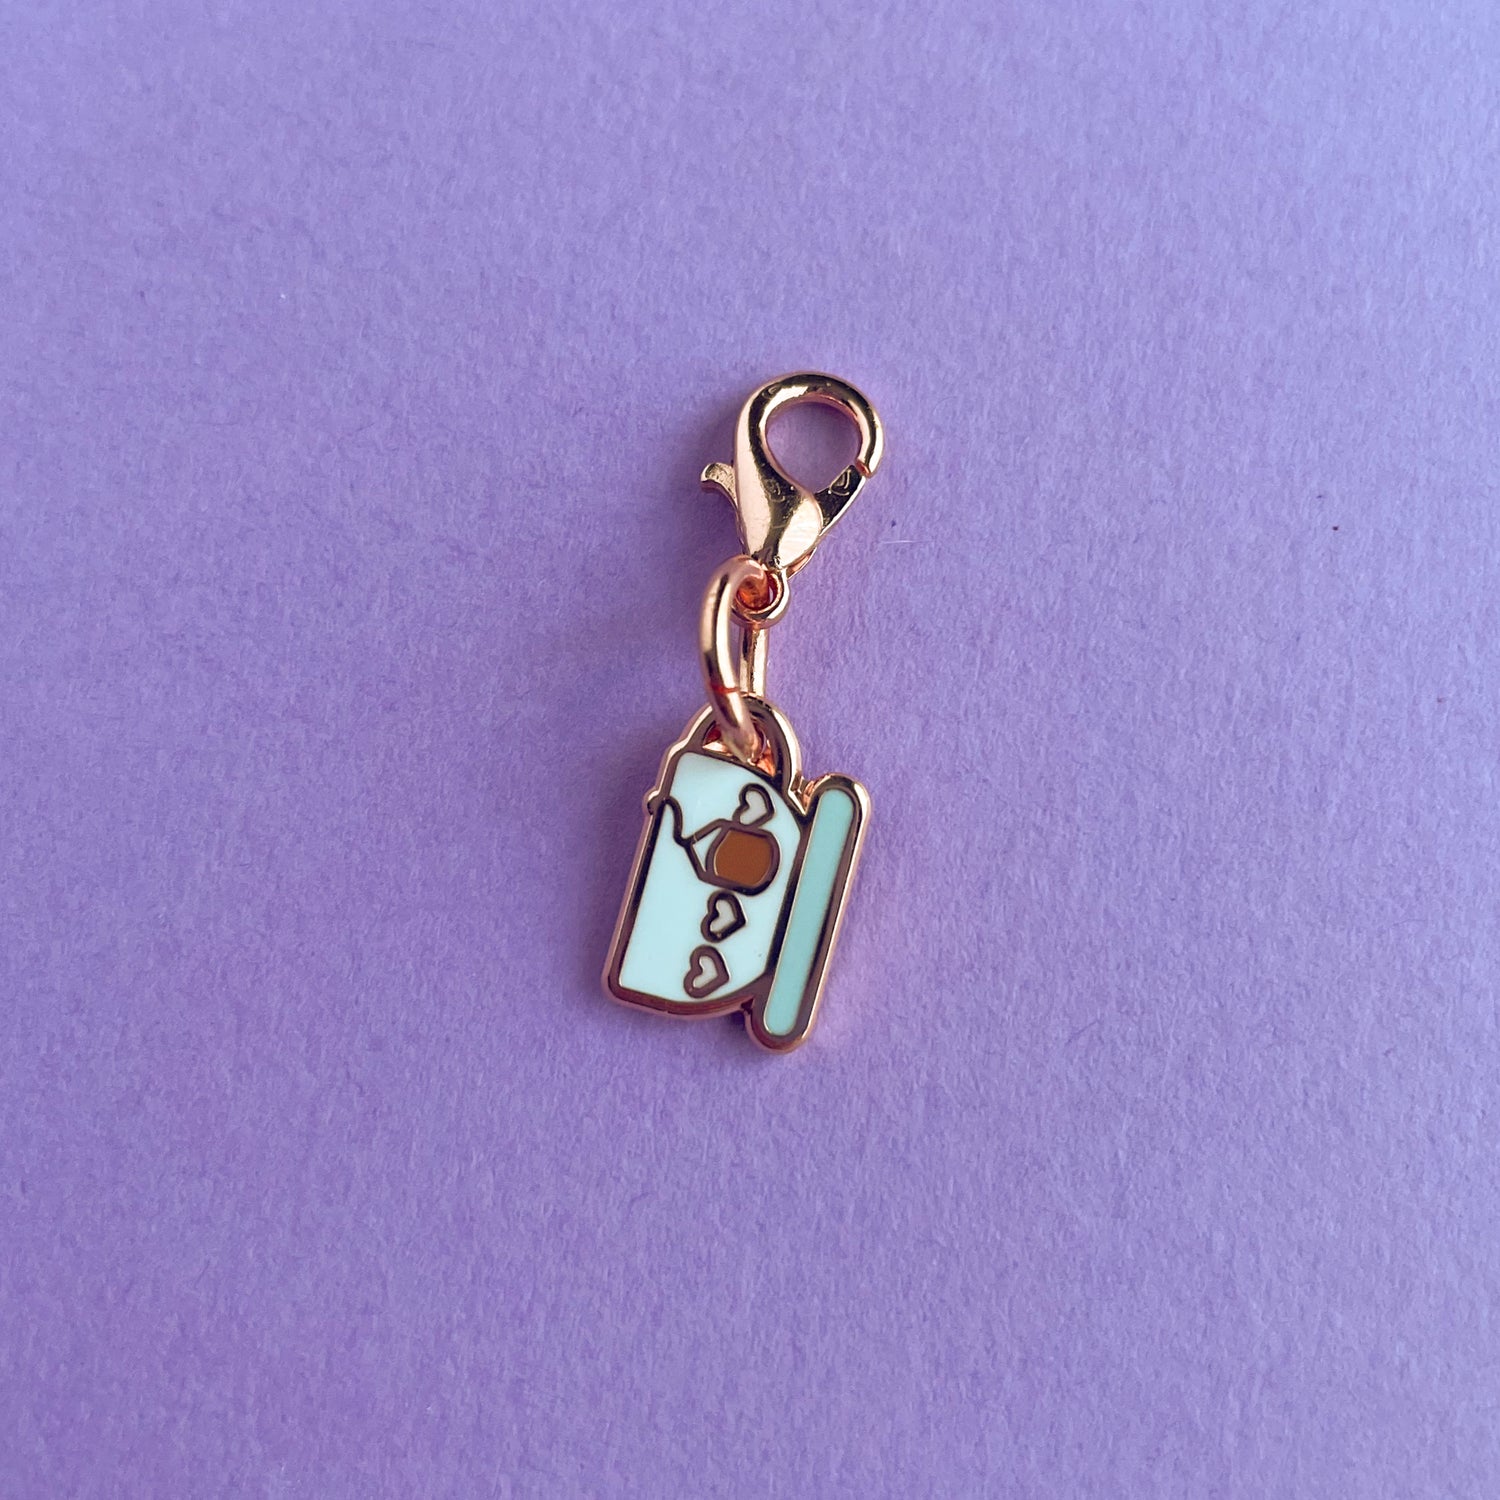 A charm on a lobster claw clasp that is shaped like a teacup with pink hearts on it and a teabag.  The charm is on a lavender background.